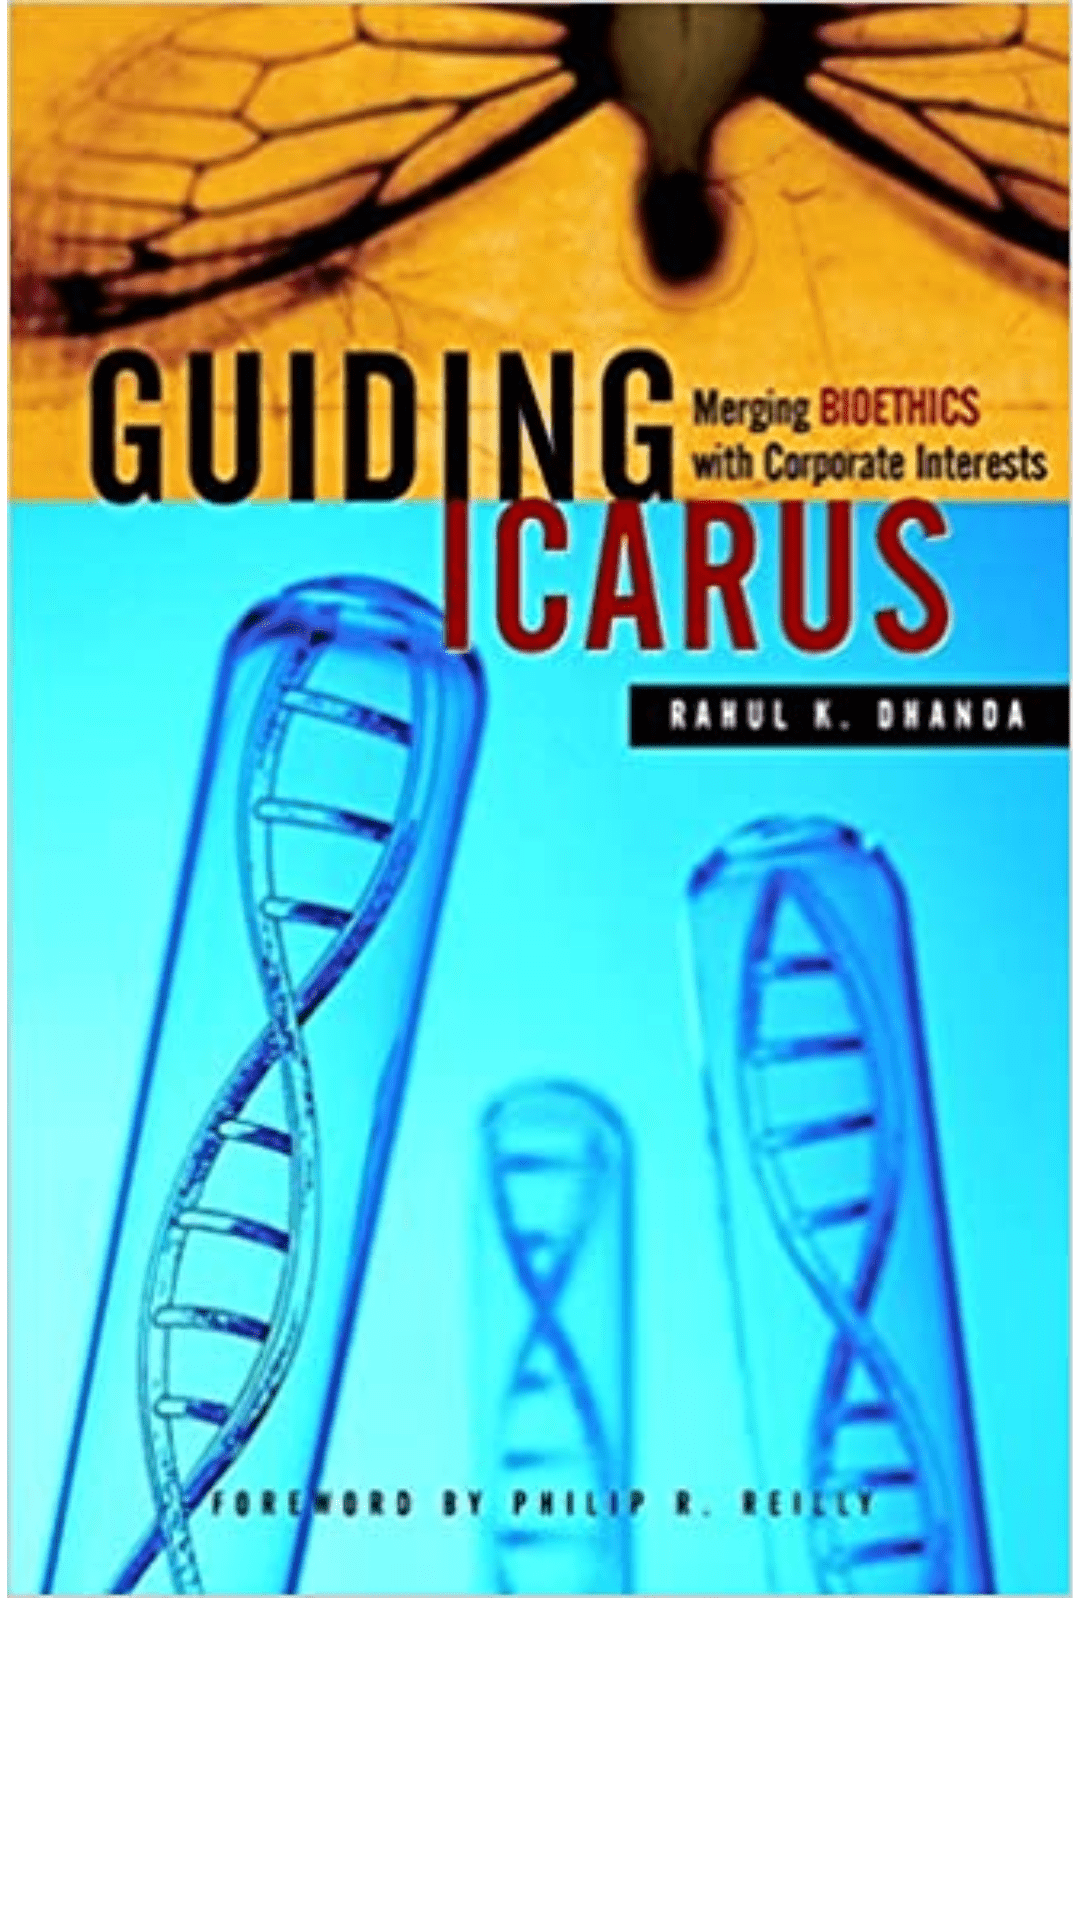 Guiding Icarus: Merging Bioethics with Corporate Interests